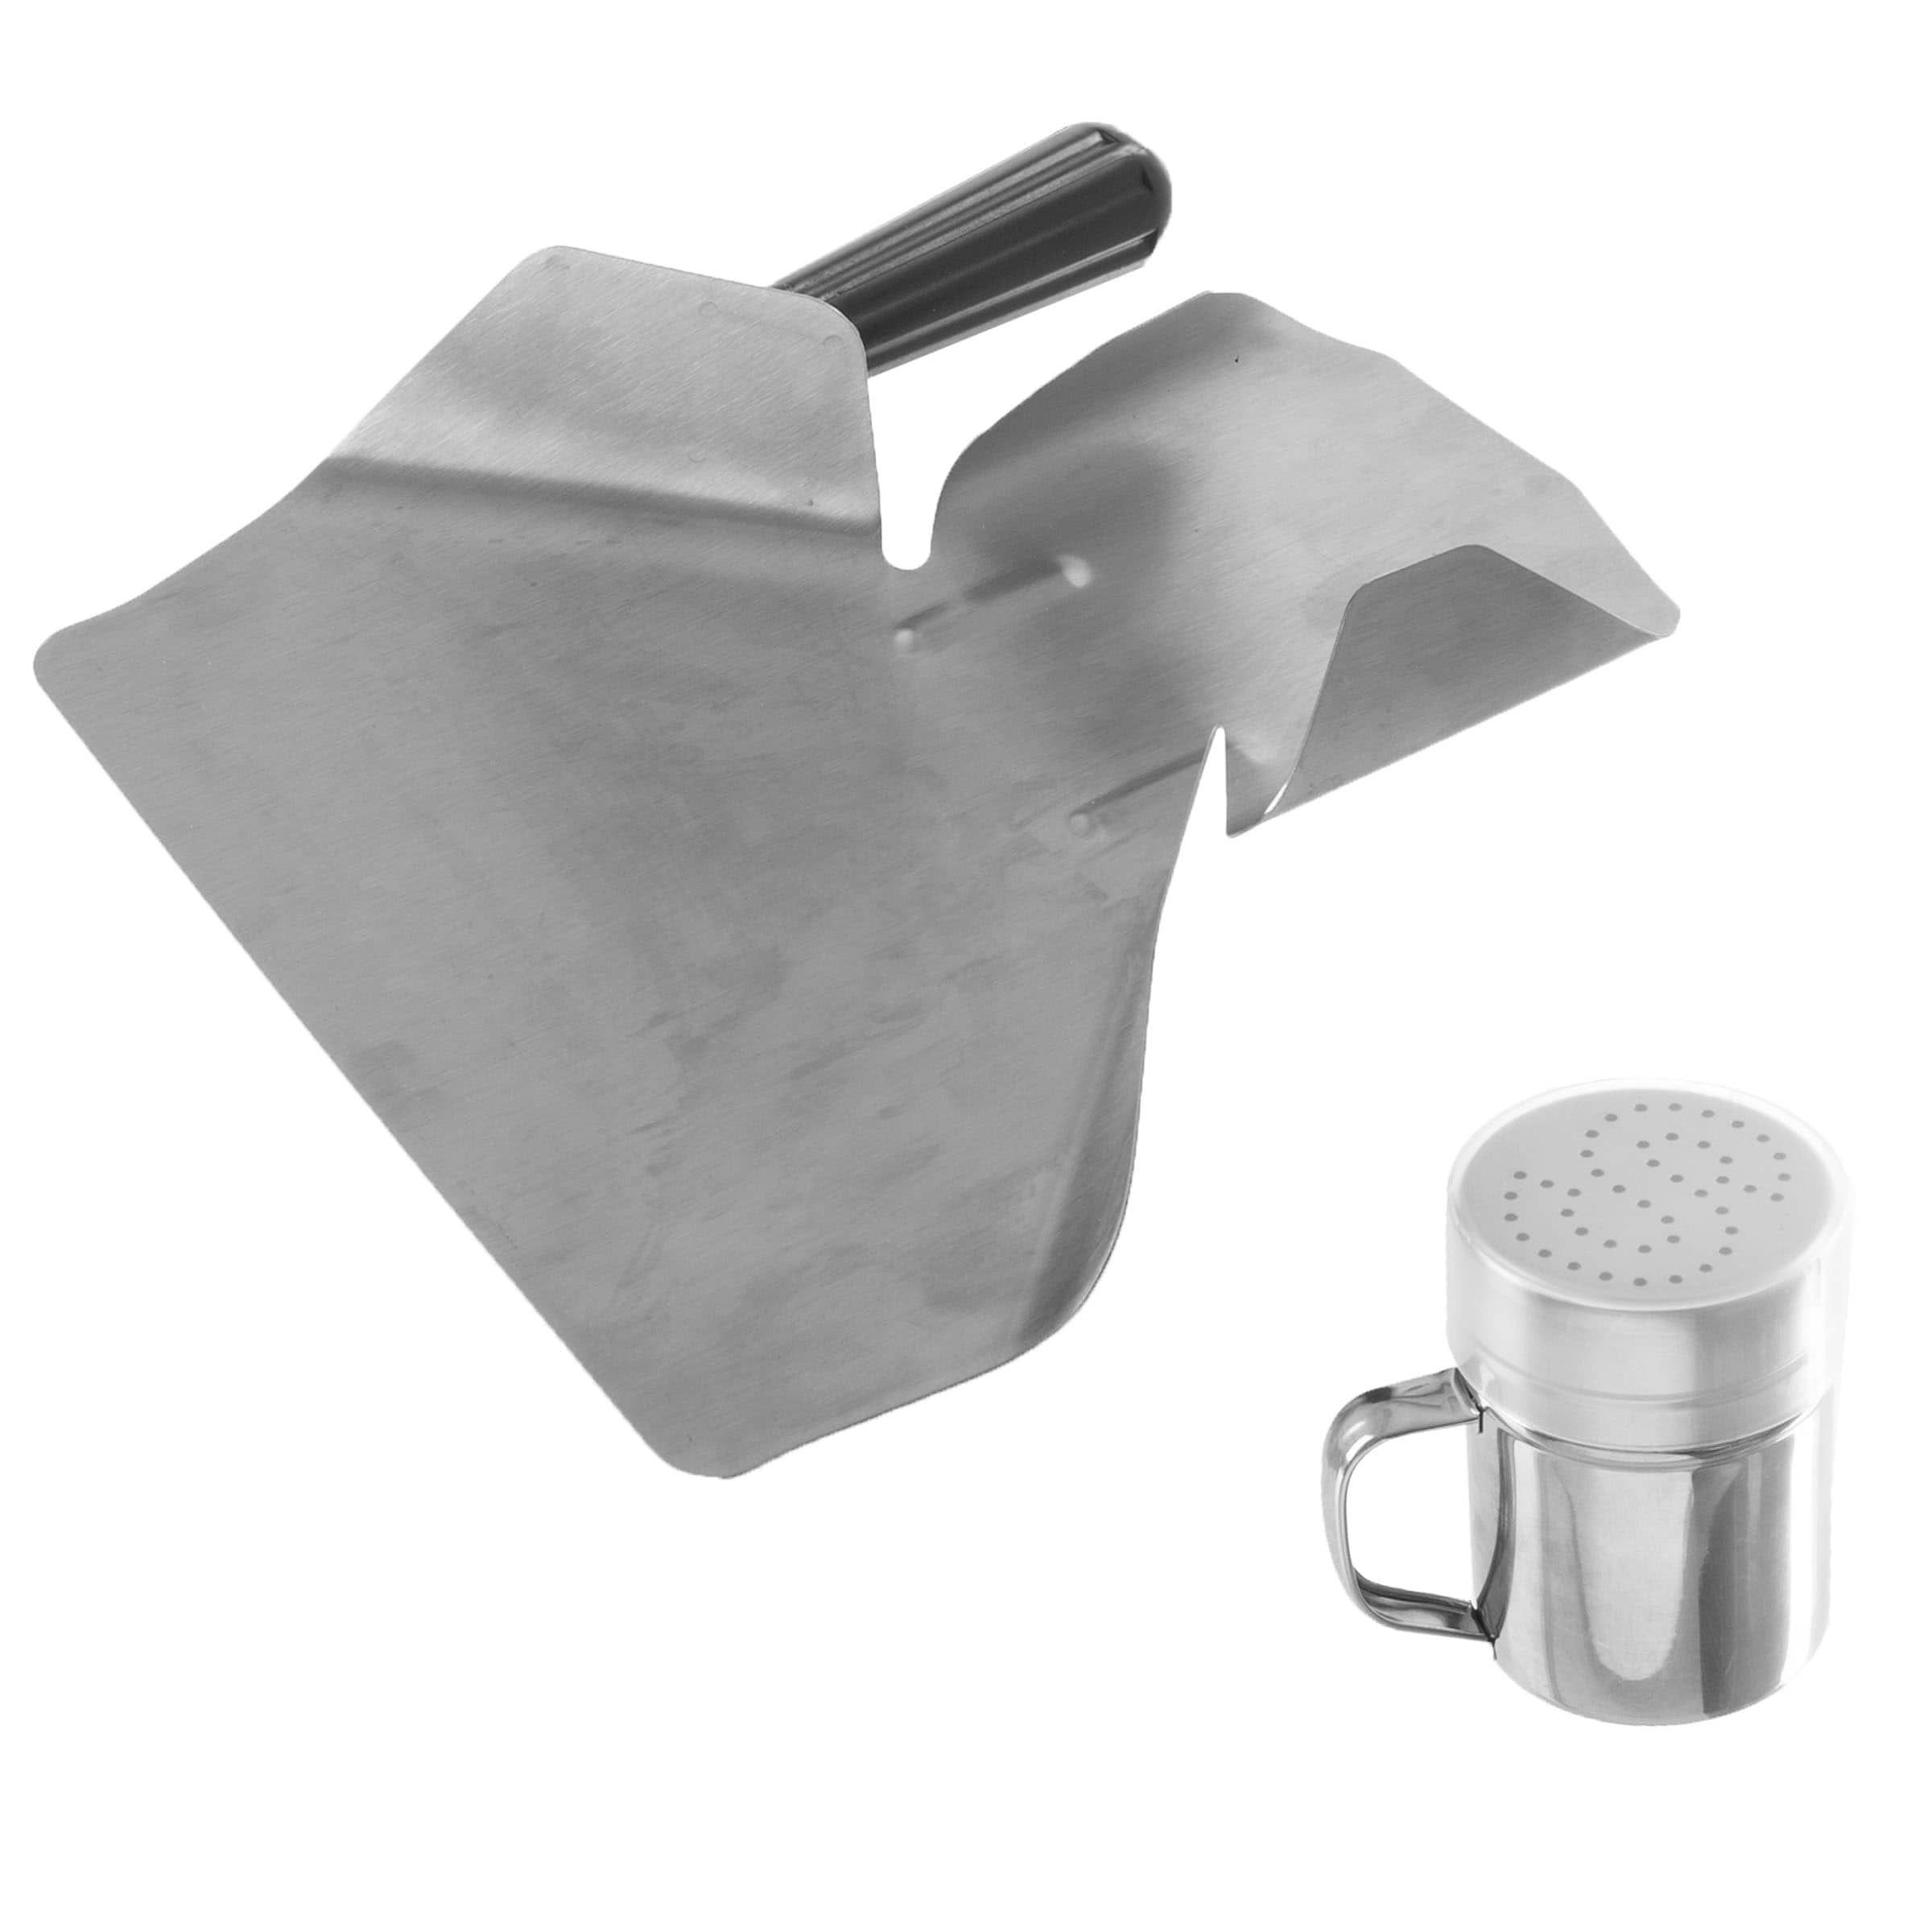 Great Northern Popcorn Scoop and Seasoning Shaker Set – 2-Piece Stainless-Steel Serving Accessories Kit